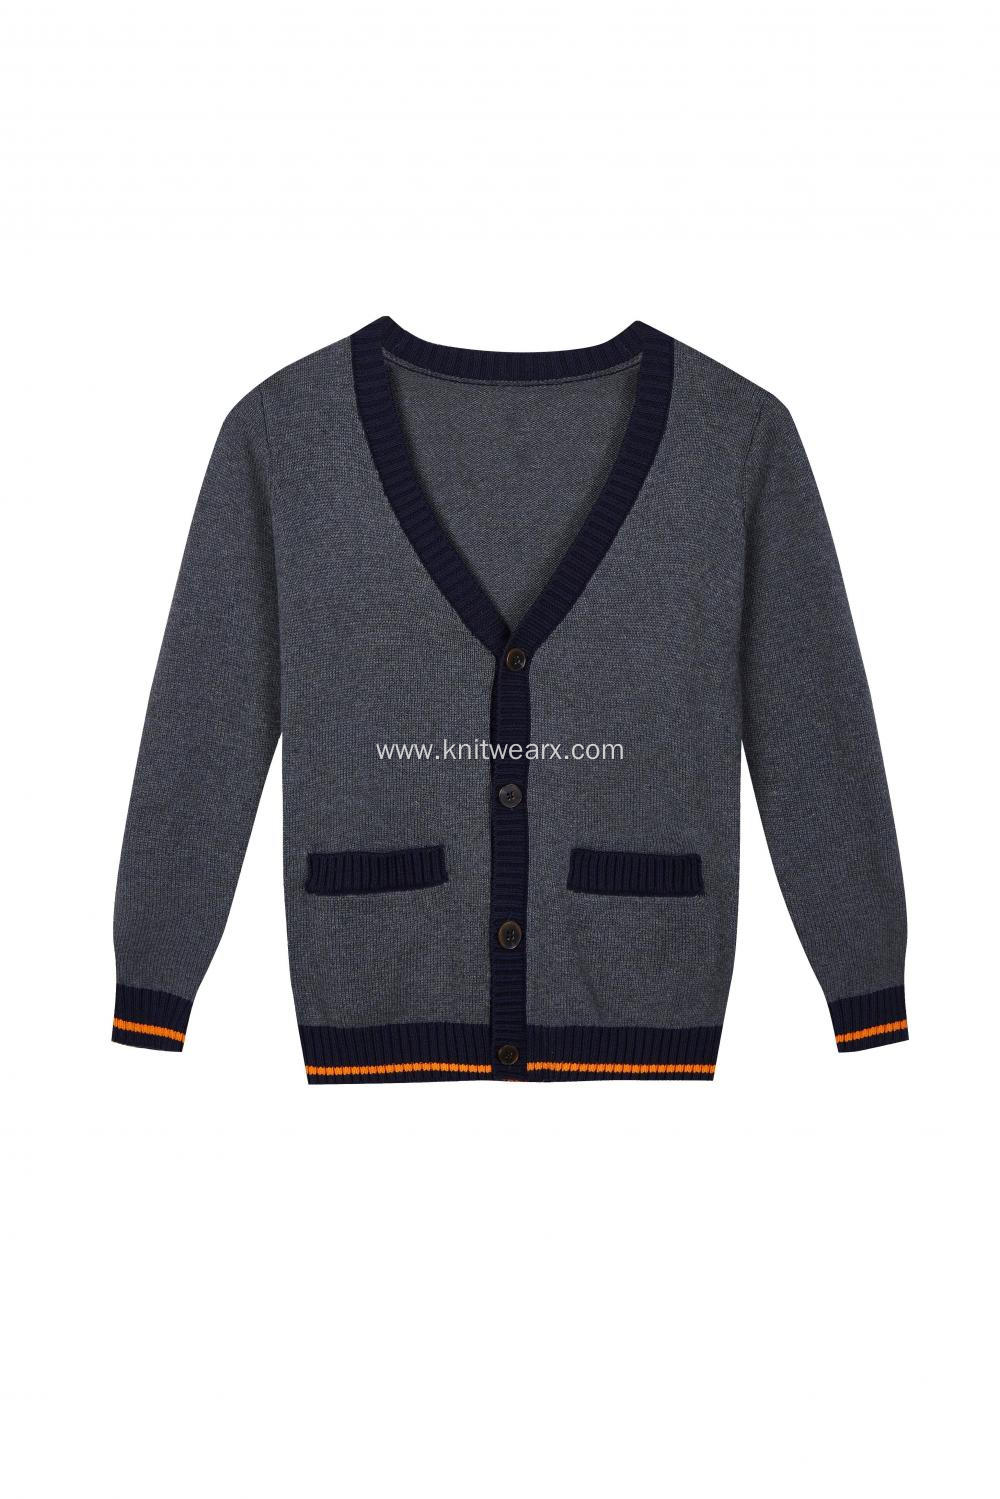 Boy's Knitted Pocket Buttoned Contrast Edge School Cardigan